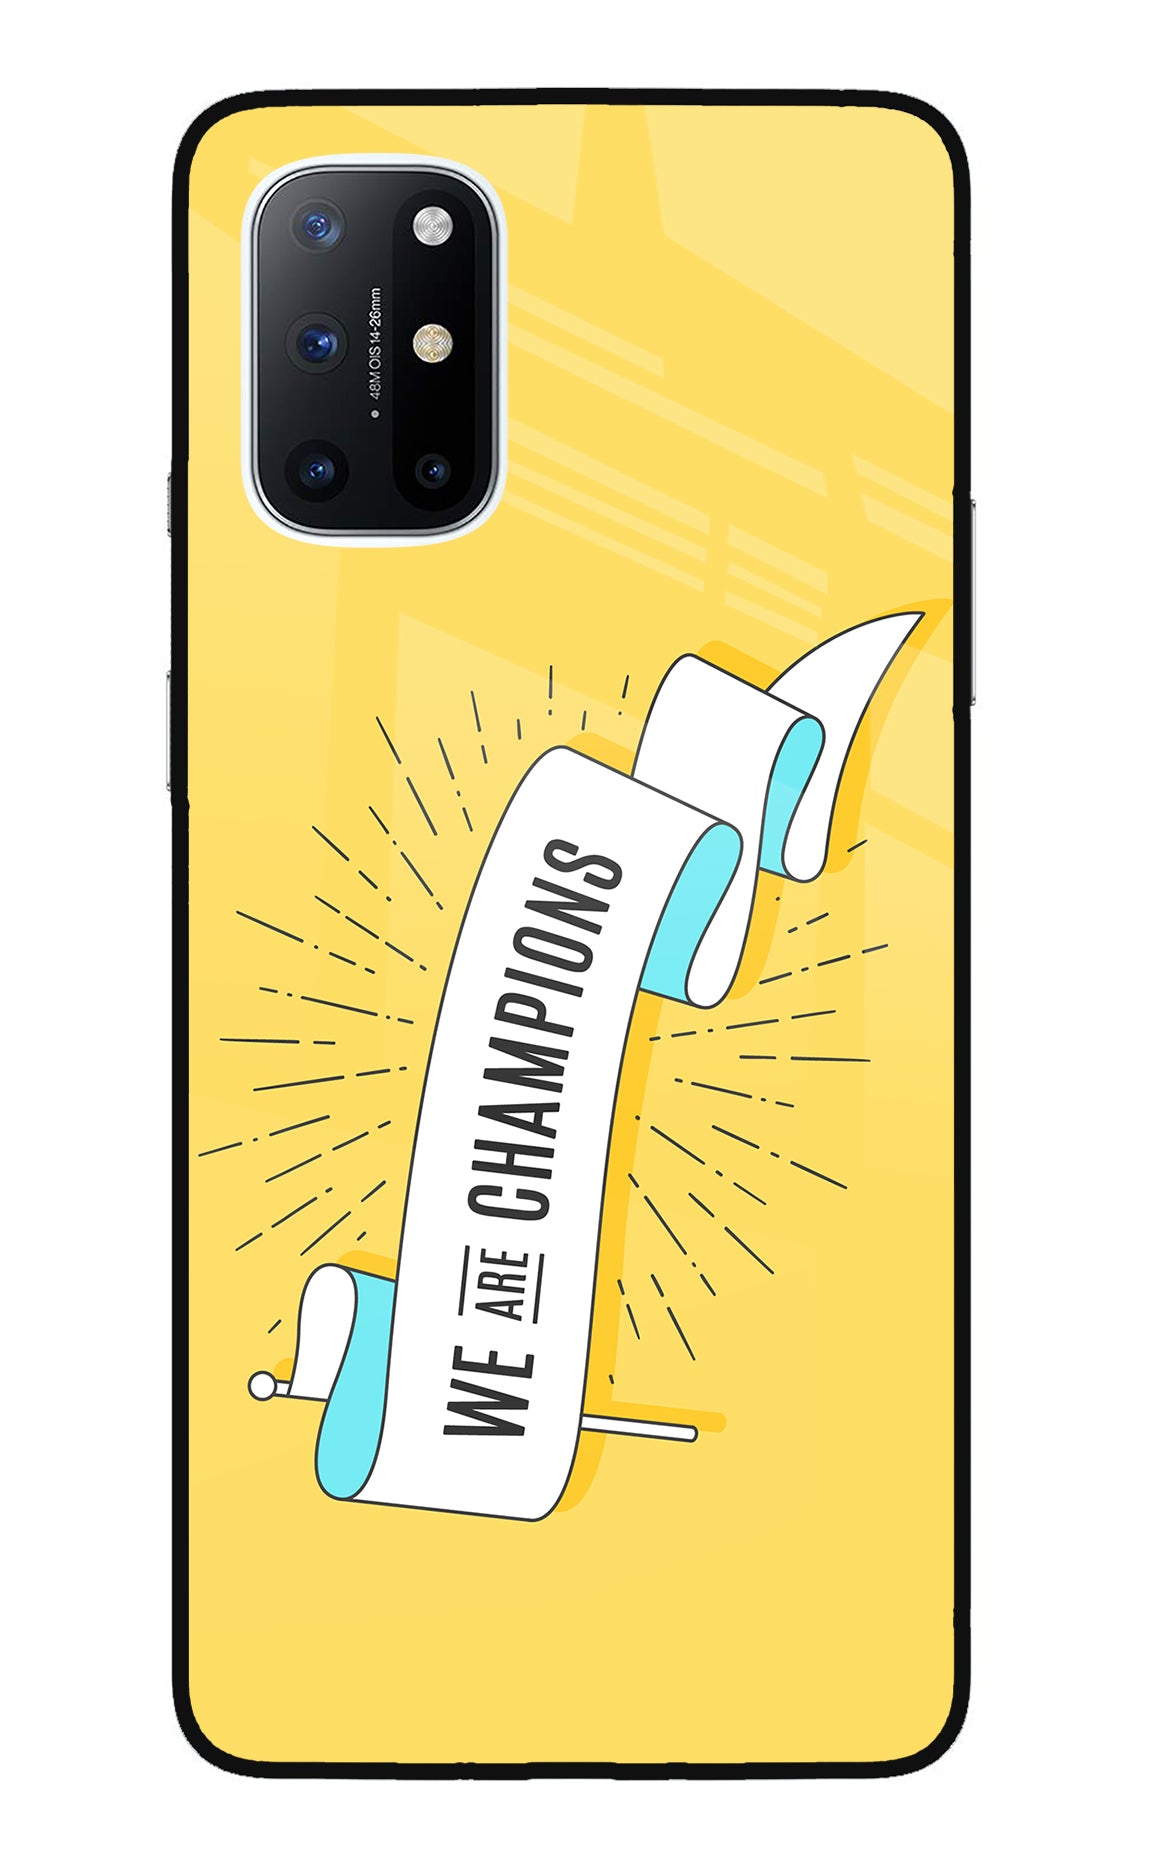 We are Champions Oneplus 8T Back Cover